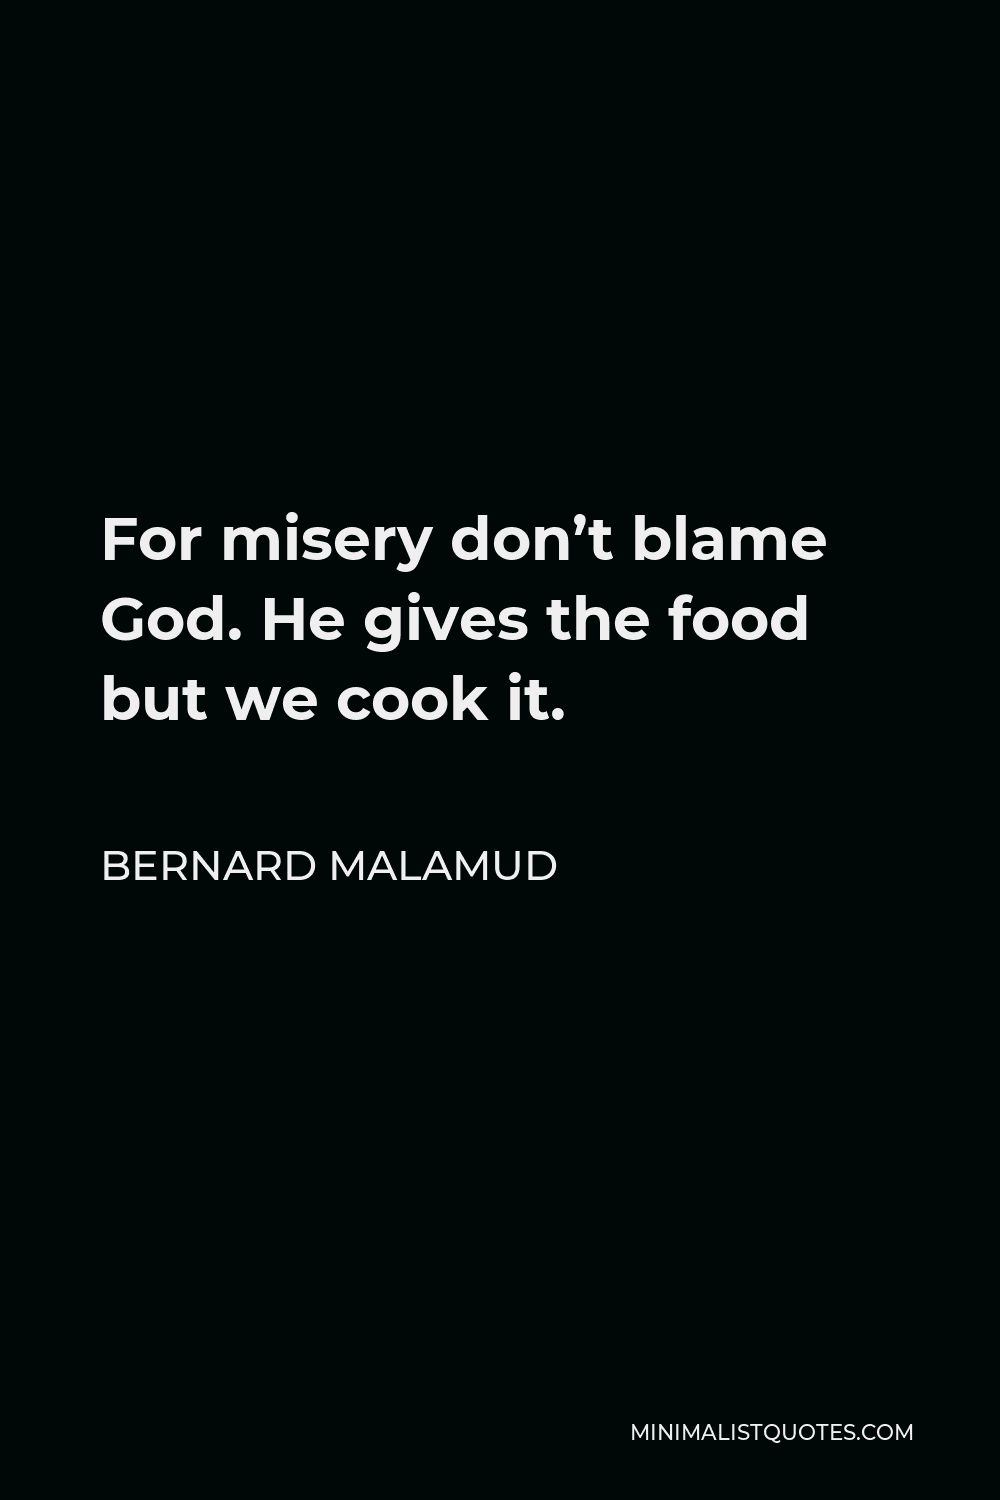 Bernard Malamud Quote - For misery don’t blame God. He gives the food but we cook it.